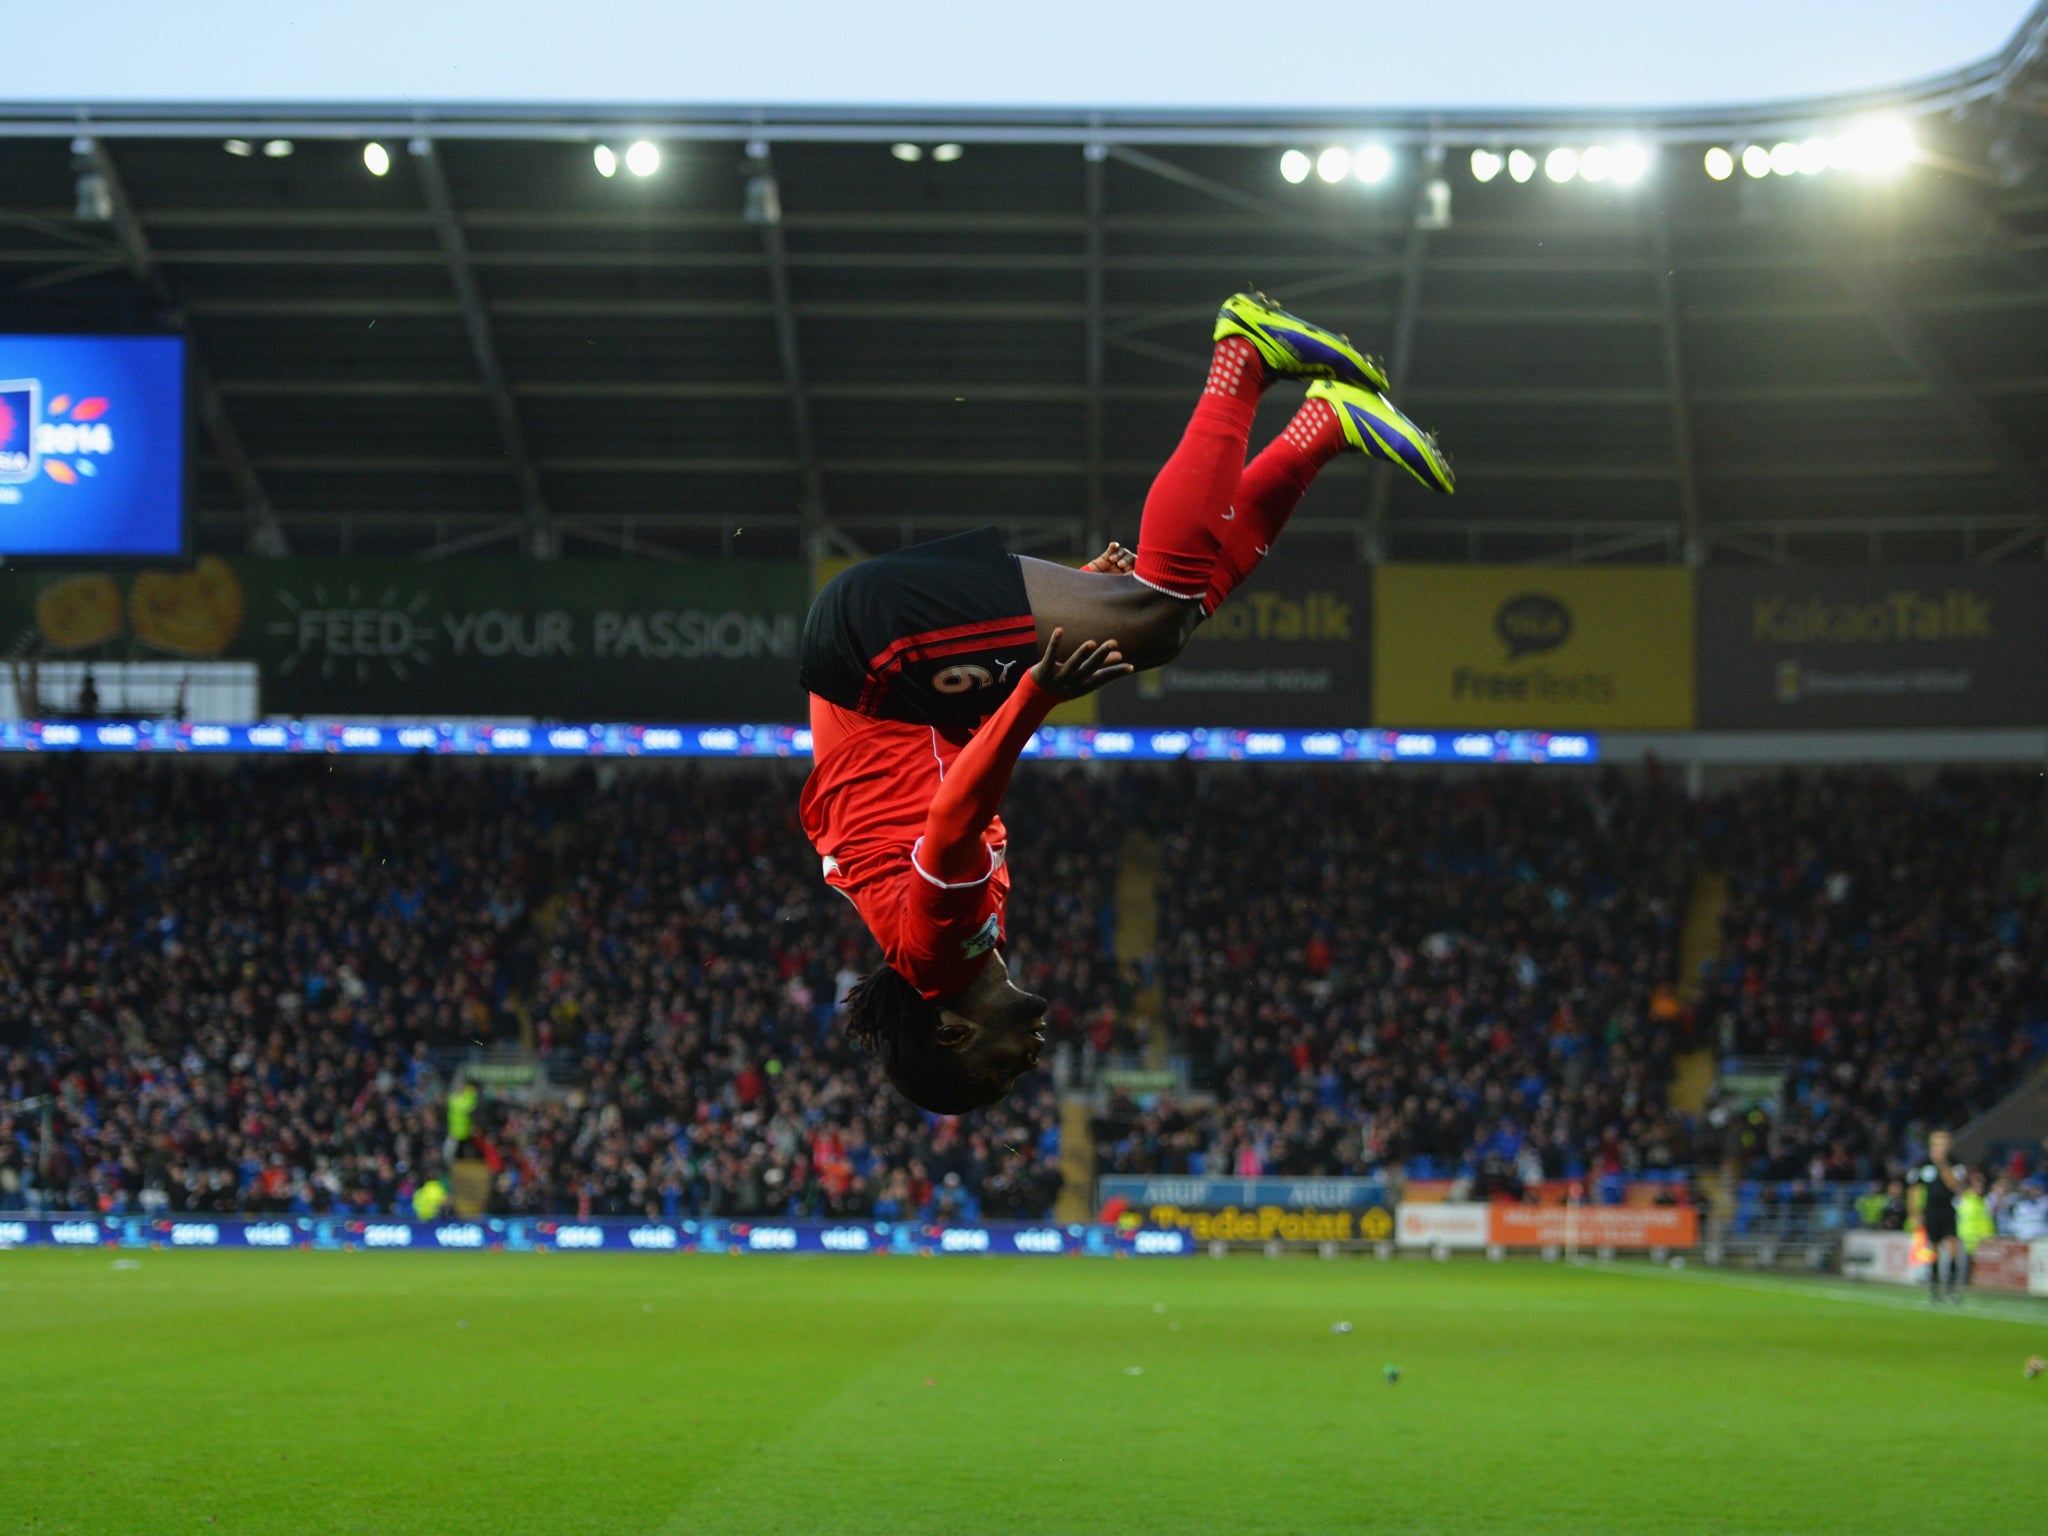 Kenwyne Jones celebrates after scoring the winner for Cardiff on his debut against Nowrich